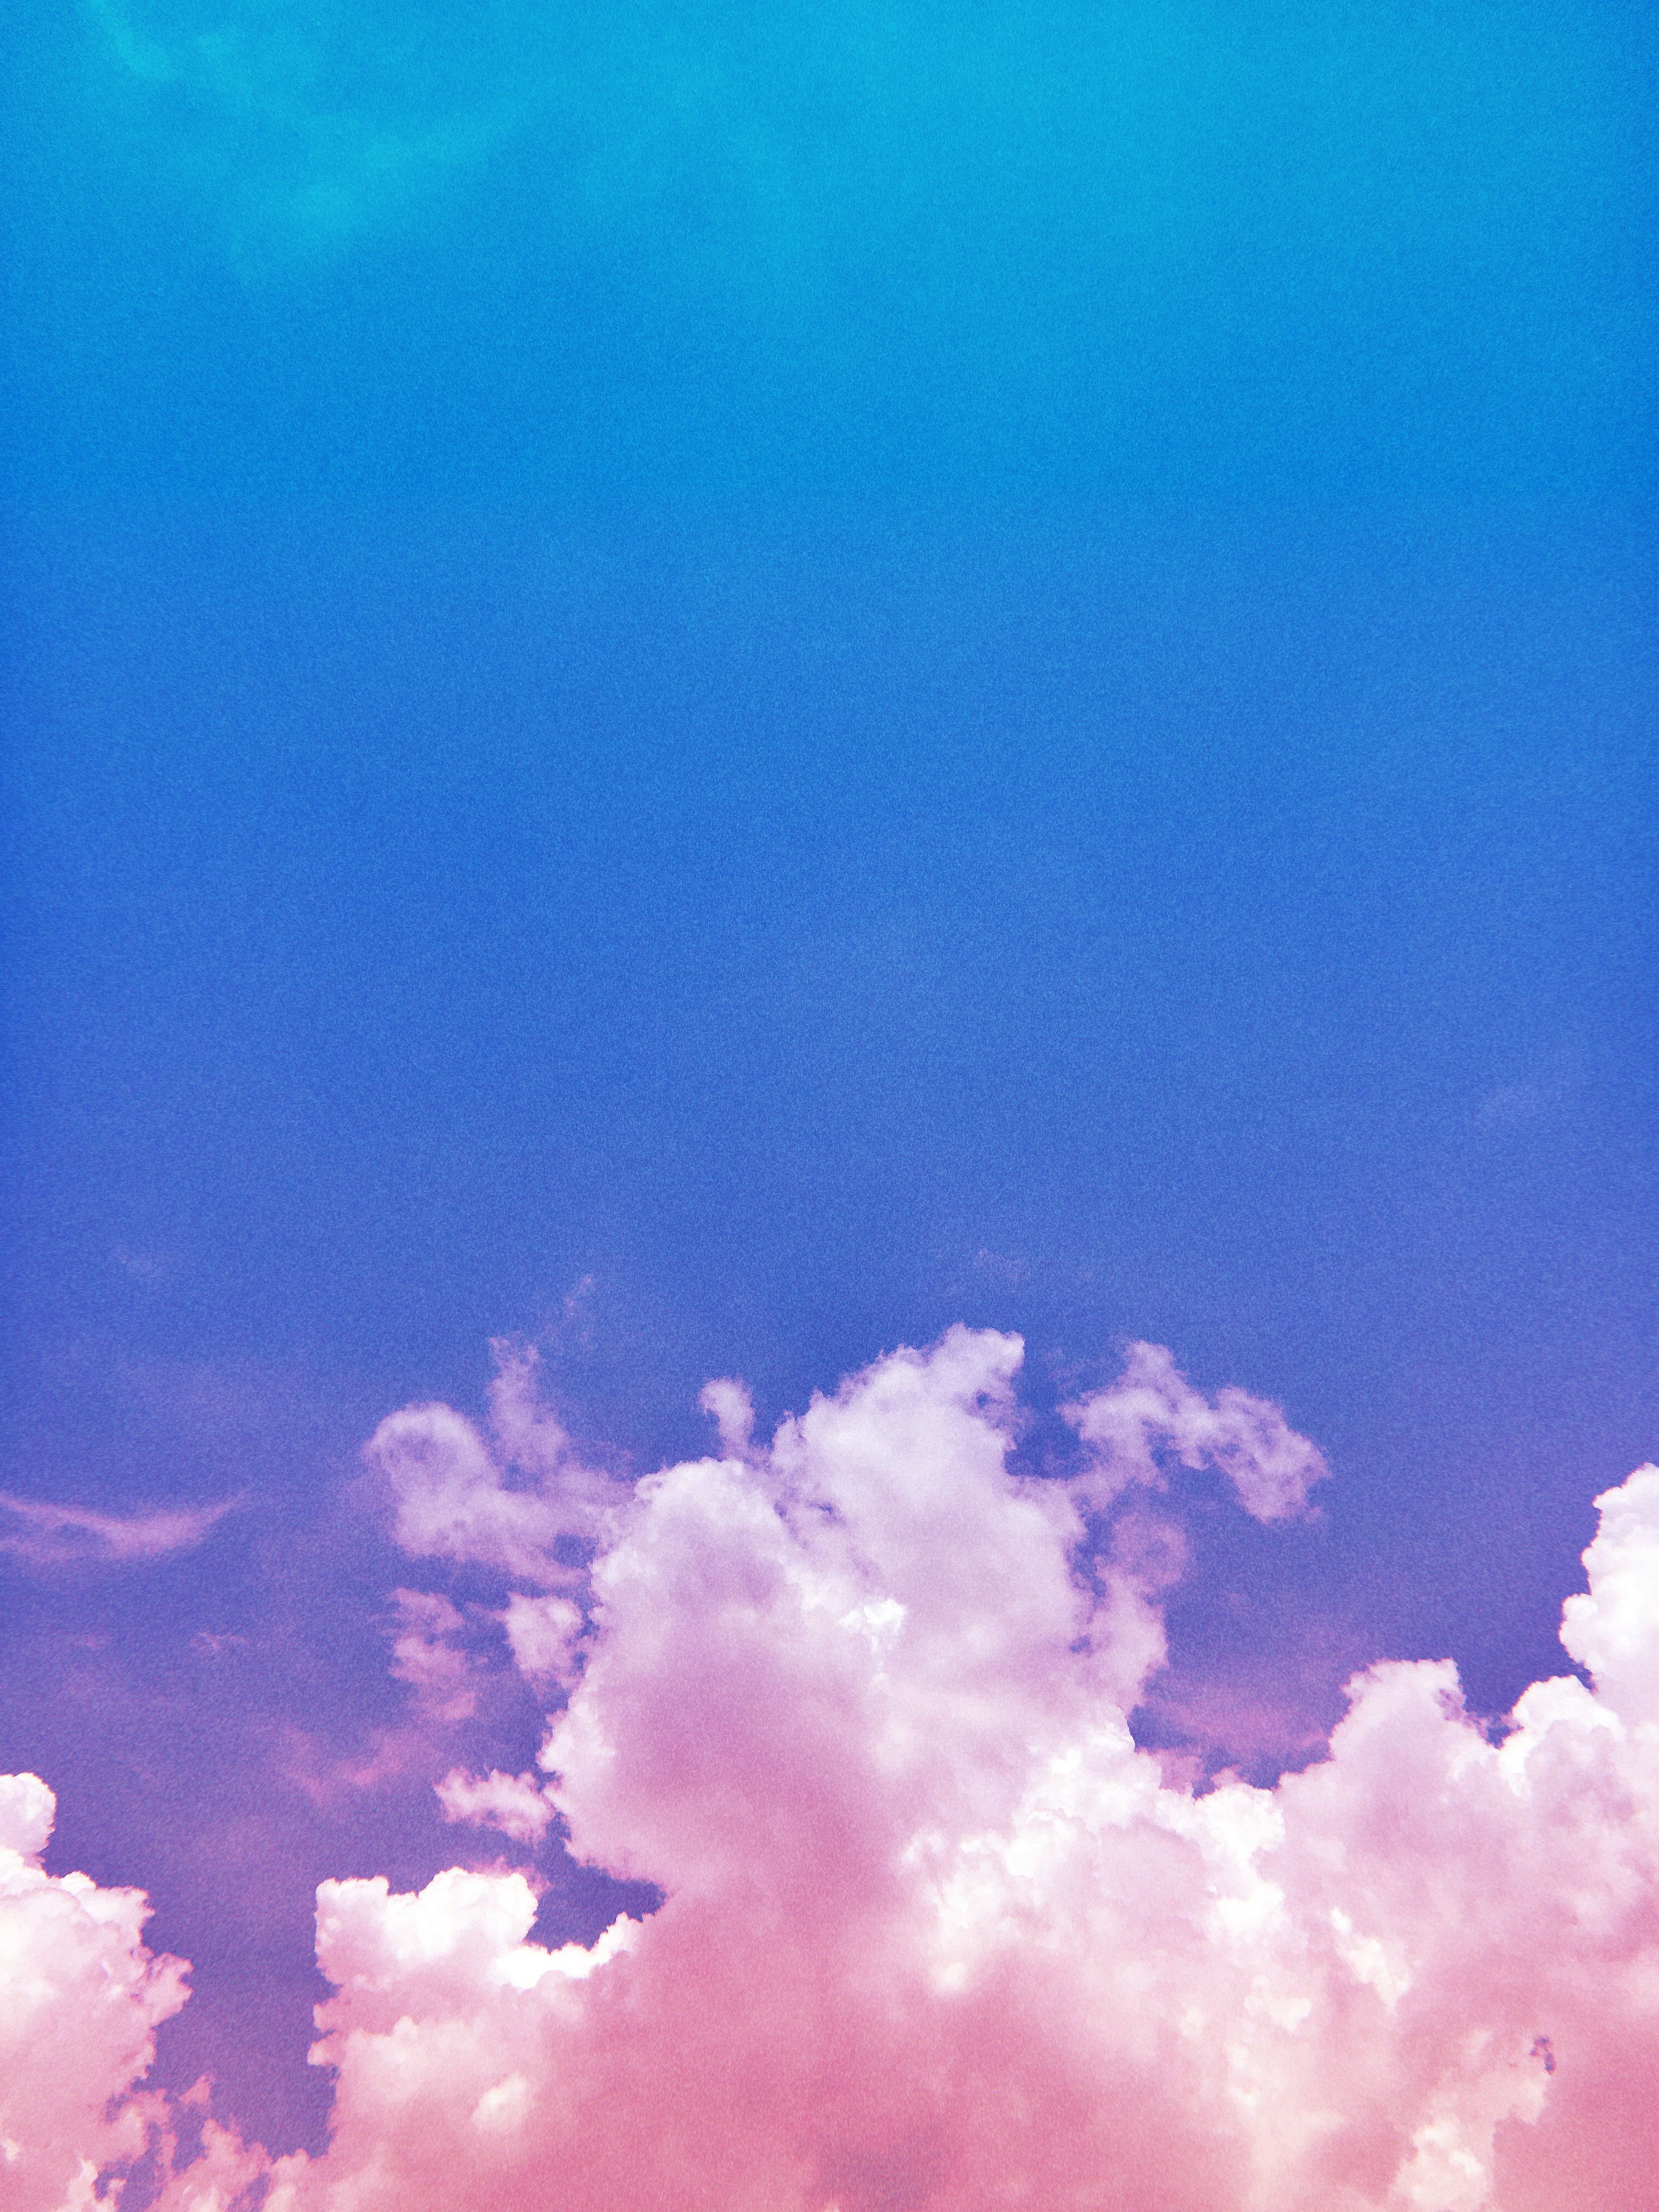 Princess and Pages. Clouds, Cotton candy clouds, Aesthetic wallpaper